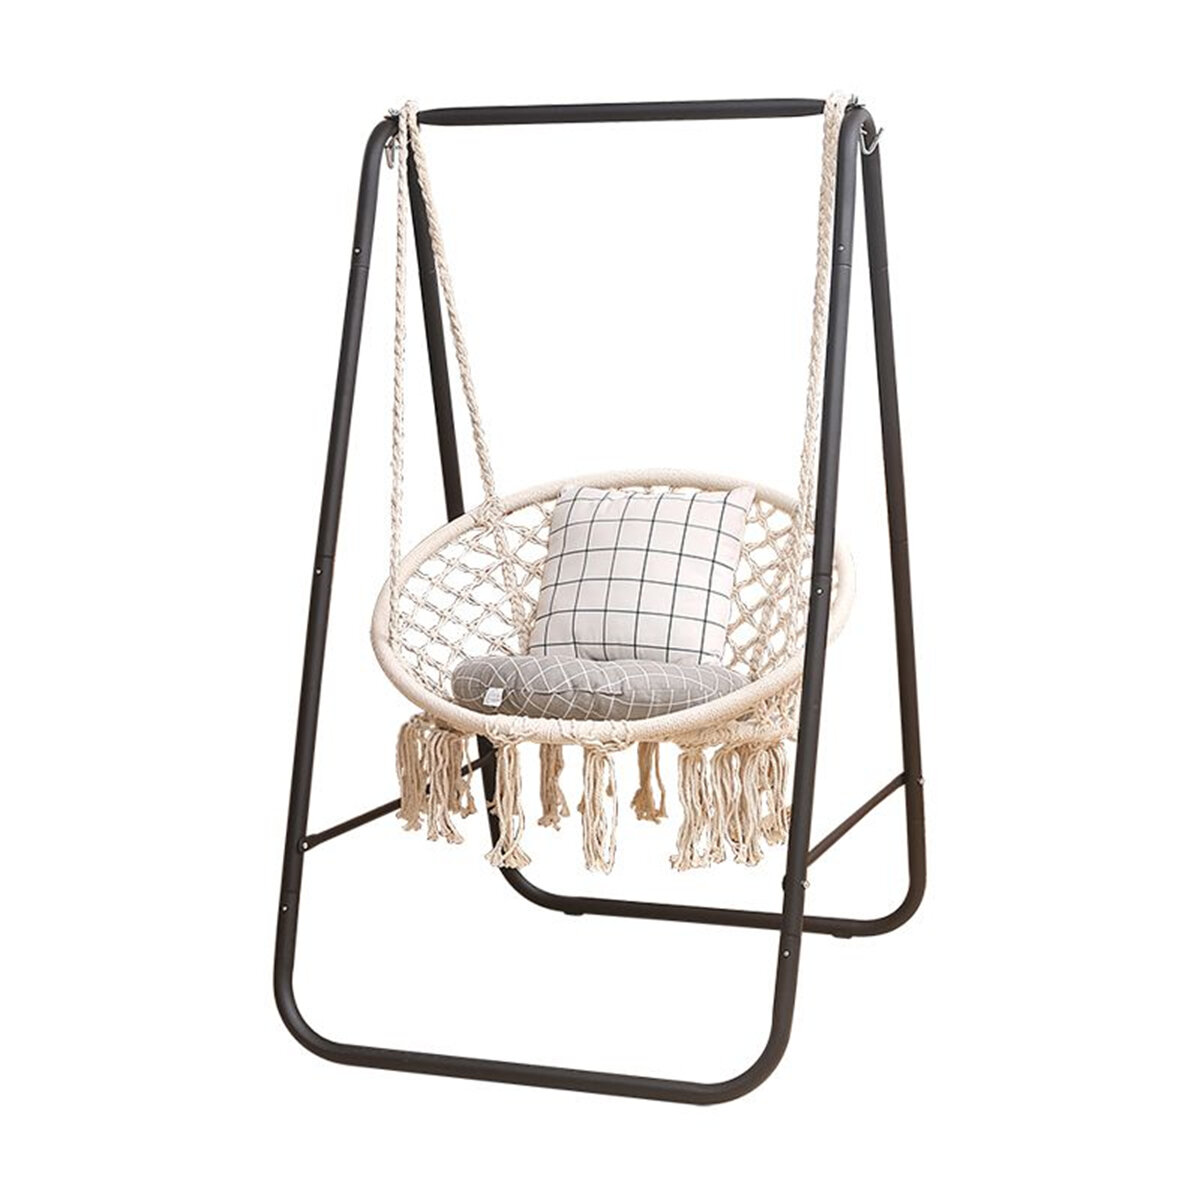 Image of Metal Hammock A-shape Frame Chair Stand Swinging Seat Replacement Frame Cotton Hammock Chair